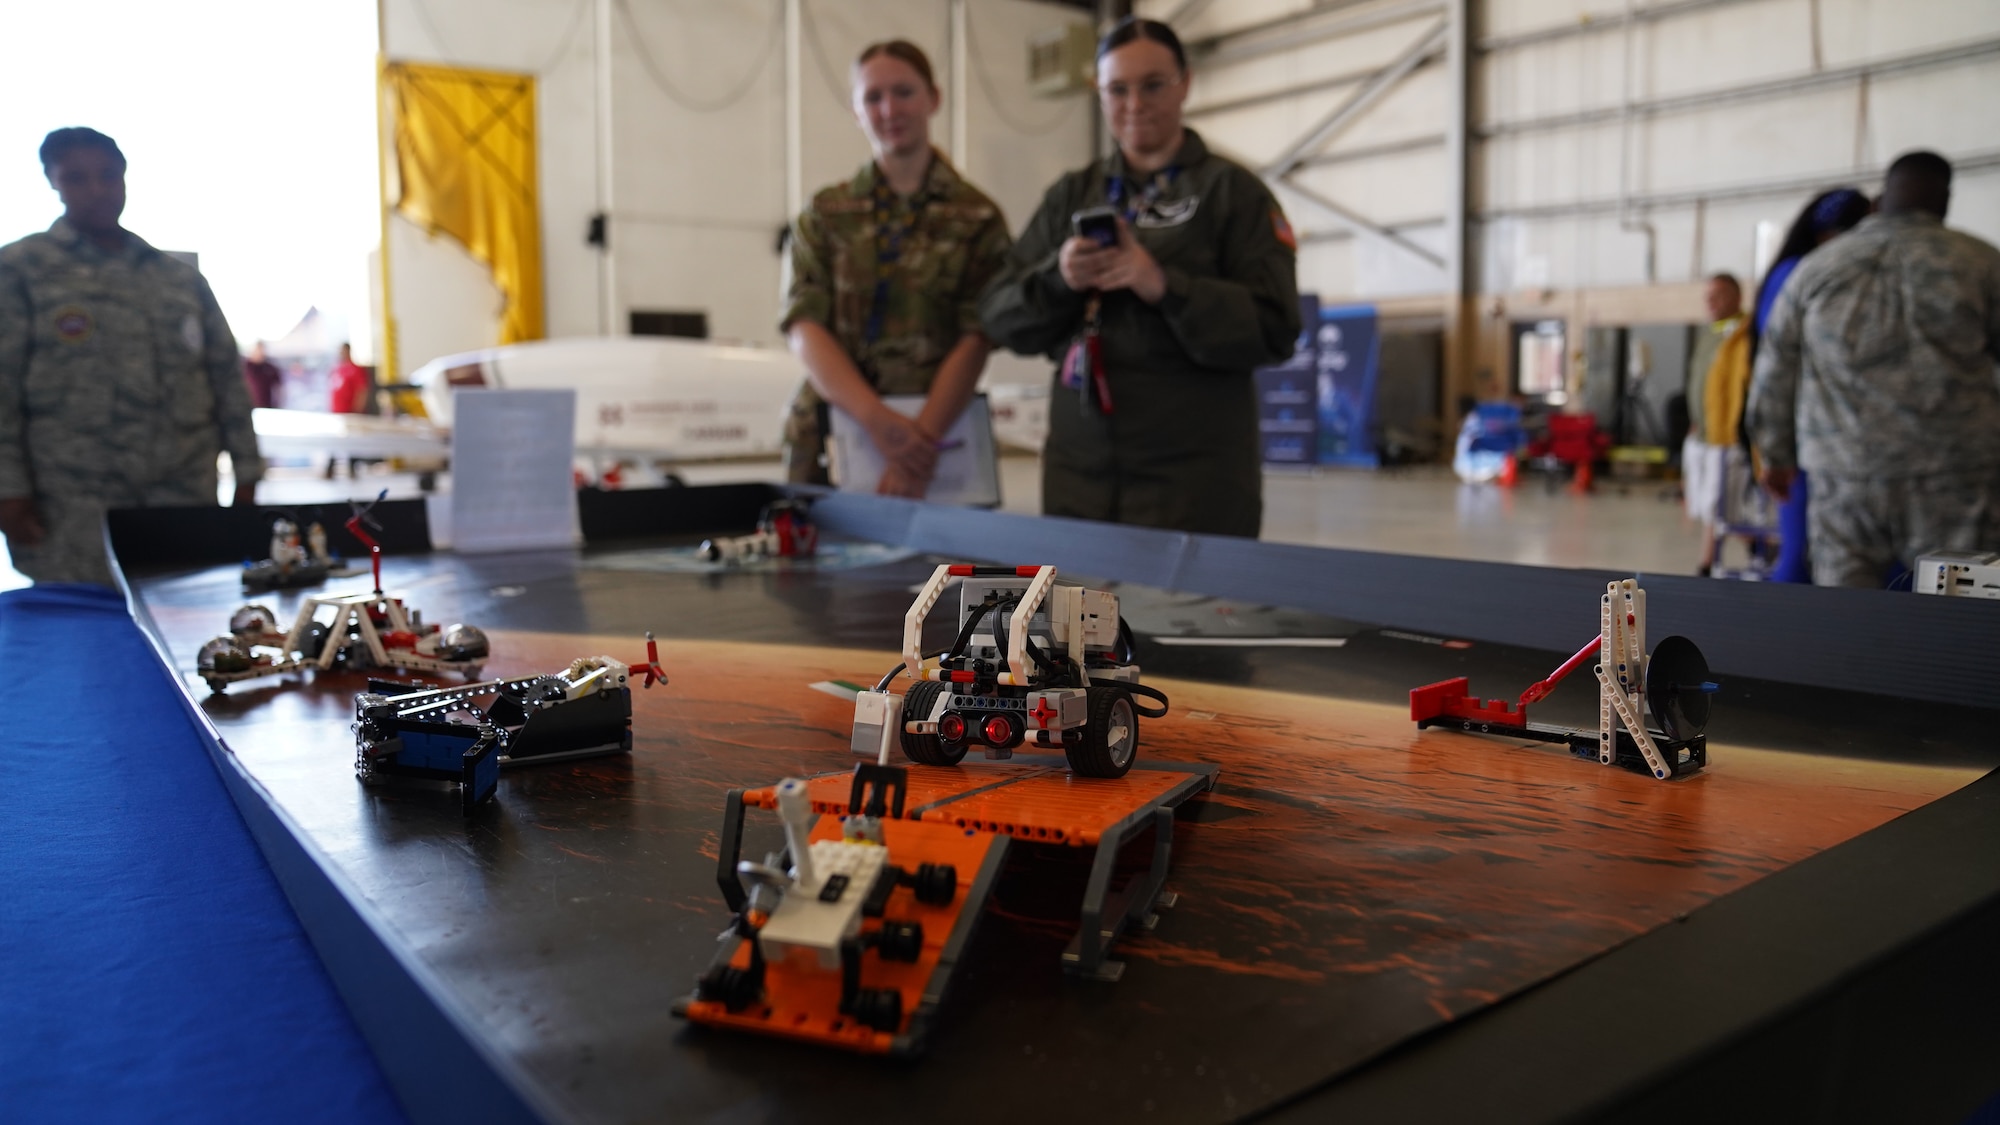 Remote controlled miniature space vehicles are displayed at the NASA table in the STEM Expo at Hangar 4 on Keesler Air Force Base, Mississippi, April 28, 2023.